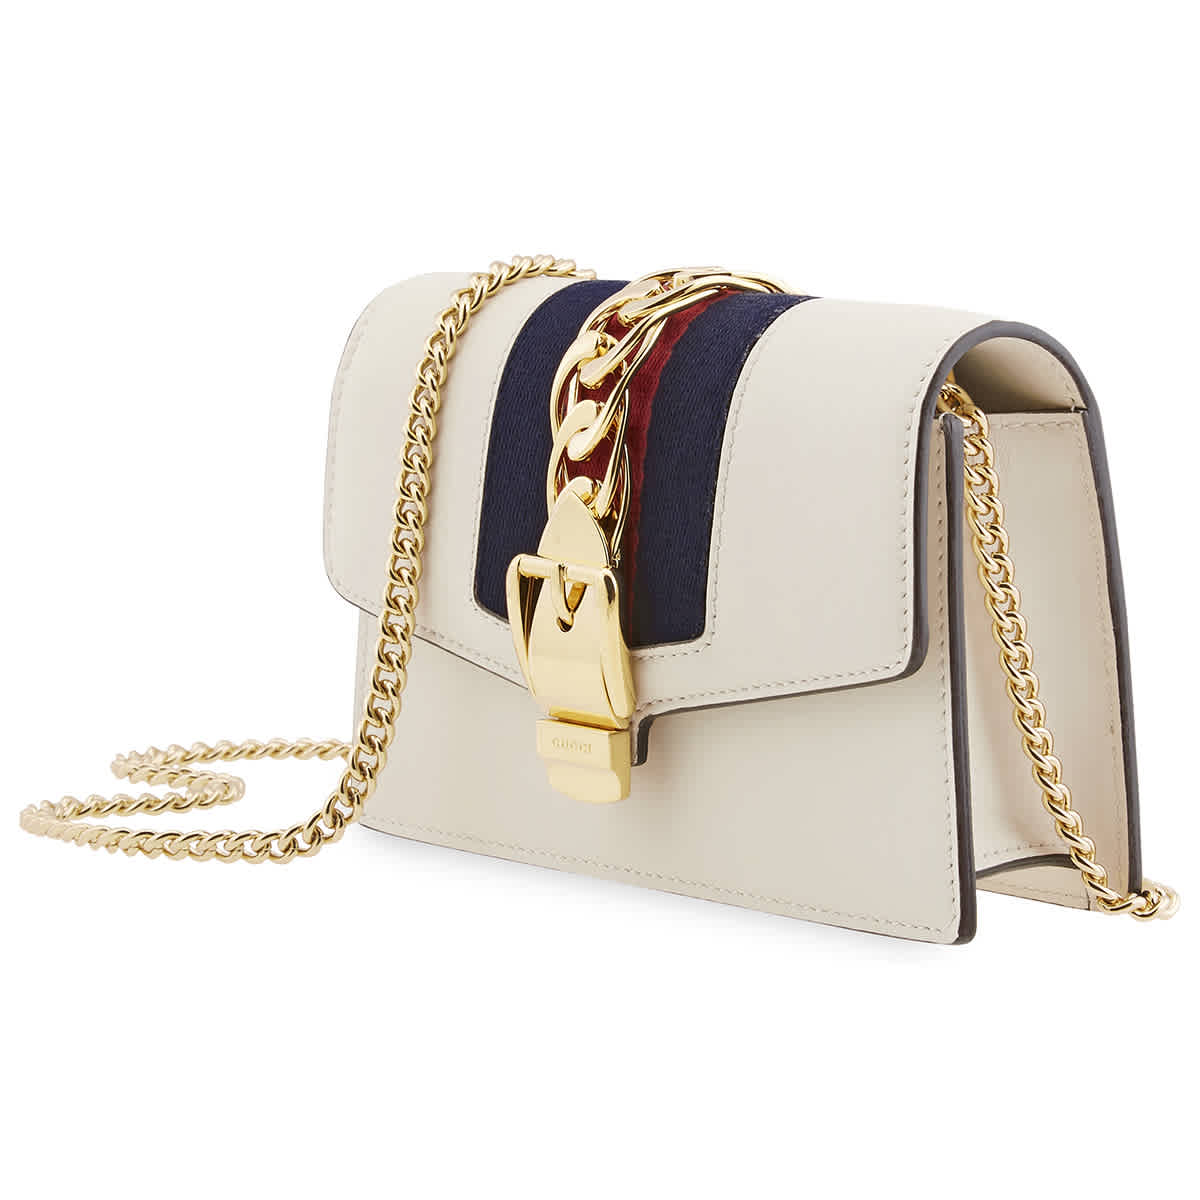 Gucci Ladies White Sylvie Leather Super Mini Shoulder Bag In Blue,gold Tone,red,white